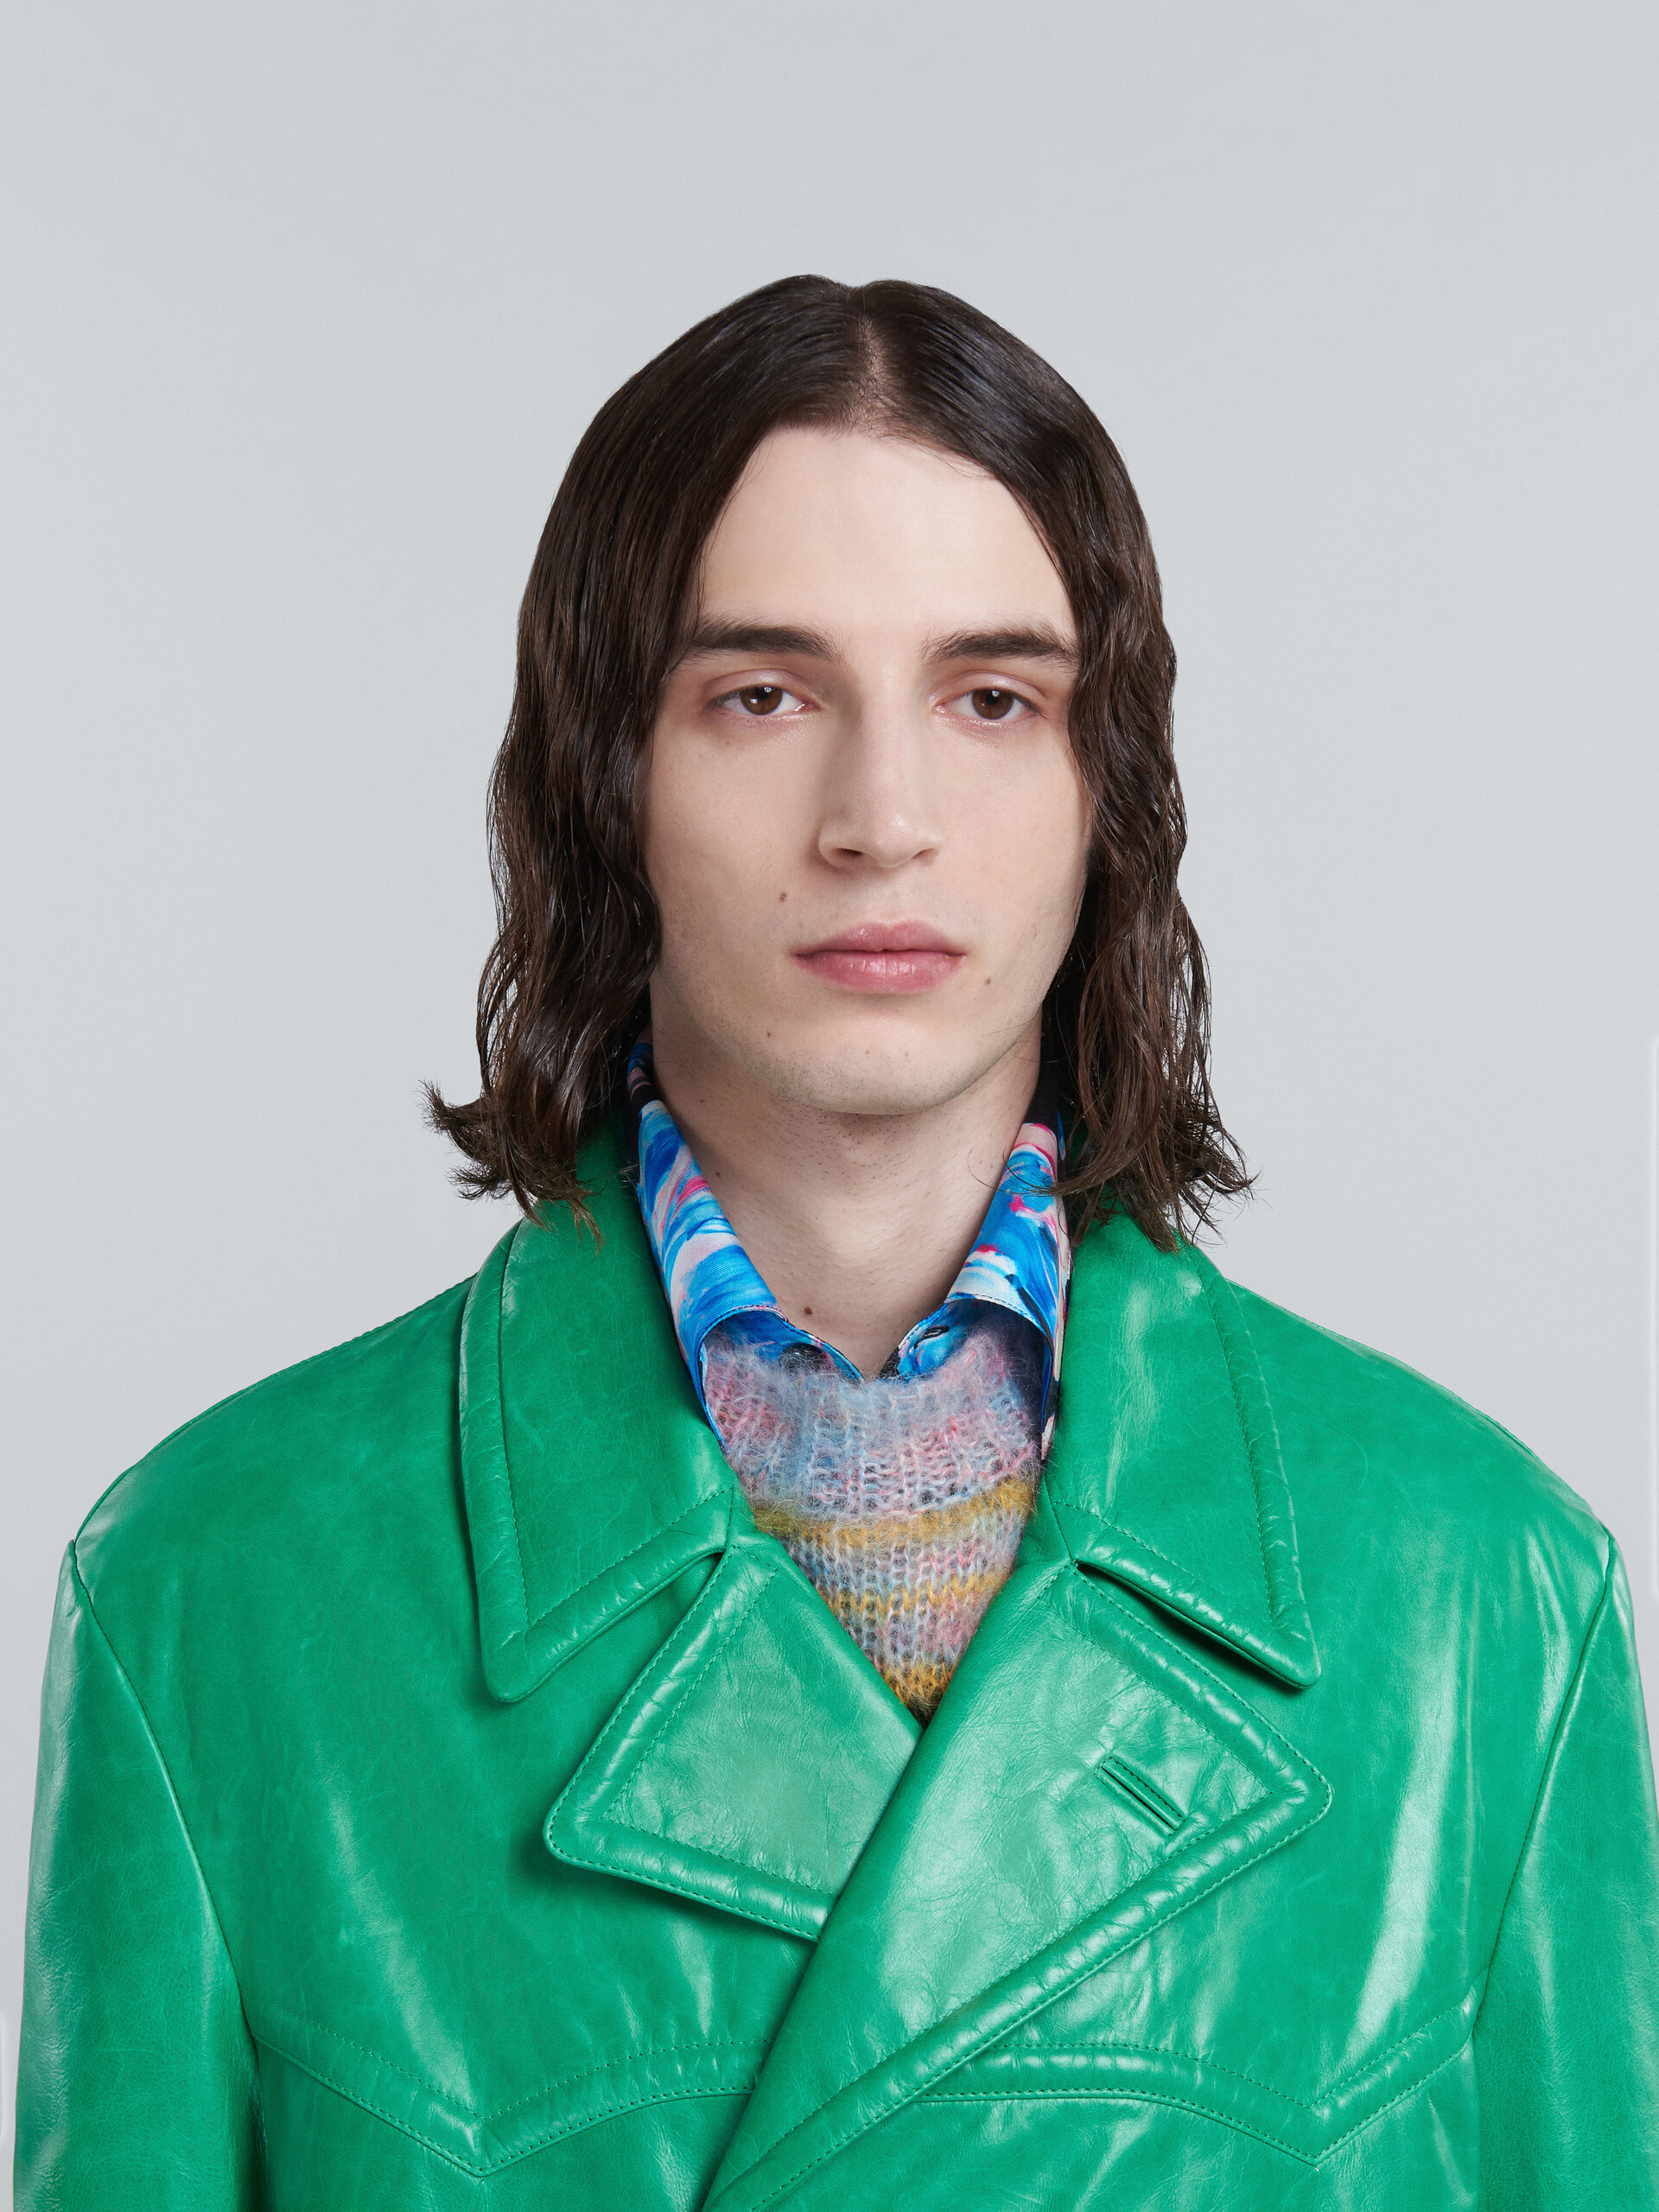 Double-breasted jacket in shiny green leather - Coat - Image 4